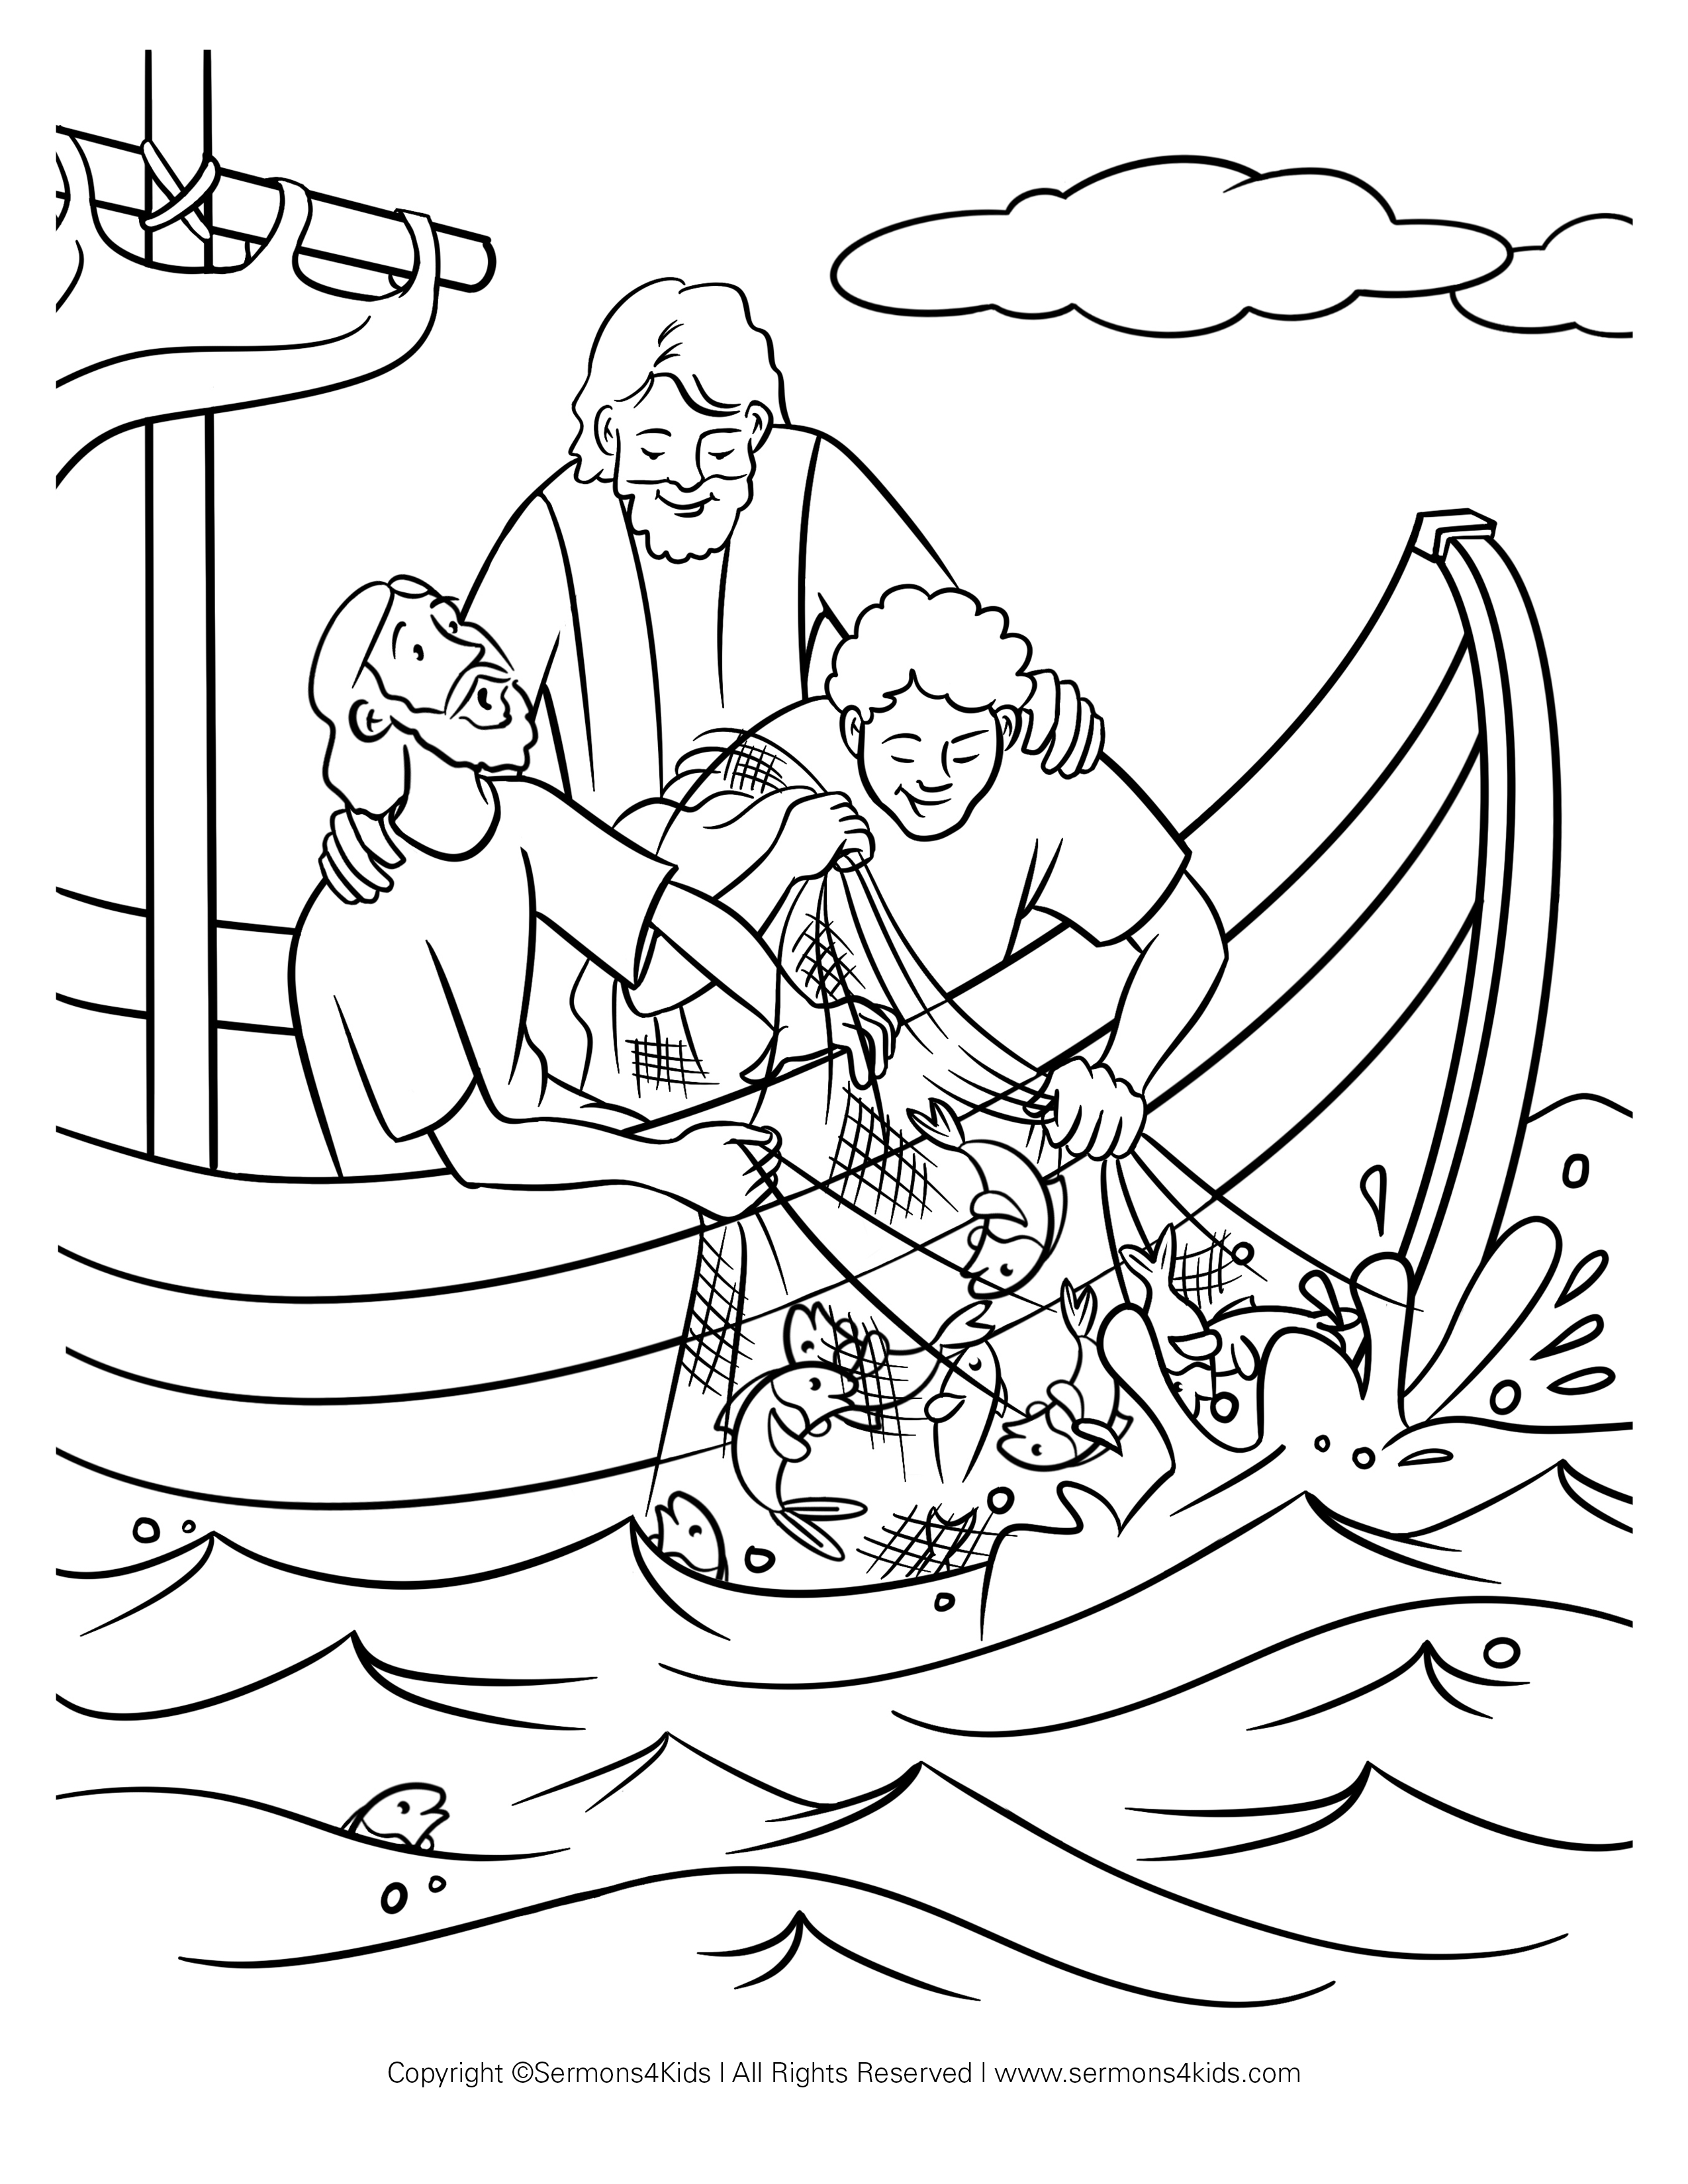 Jesus-helps-catch-fish-coloring-page